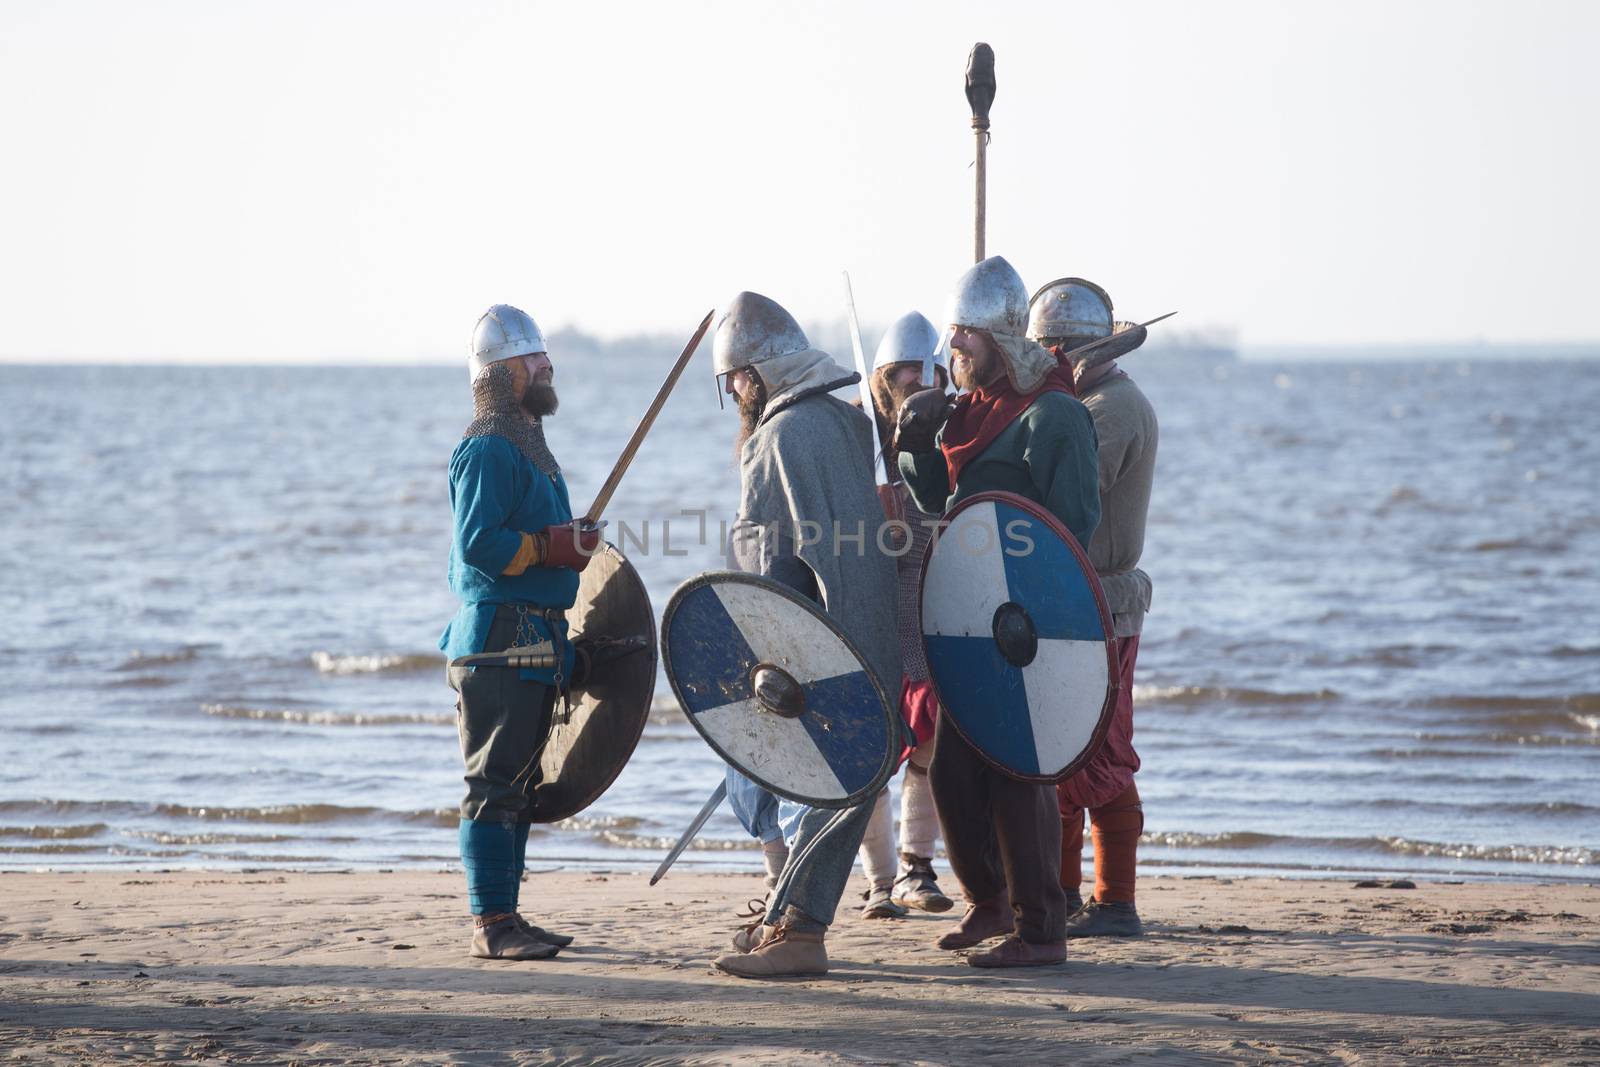 Slavic warriors reenactors with wearpons and shields getting ready for training outdoors at seaside